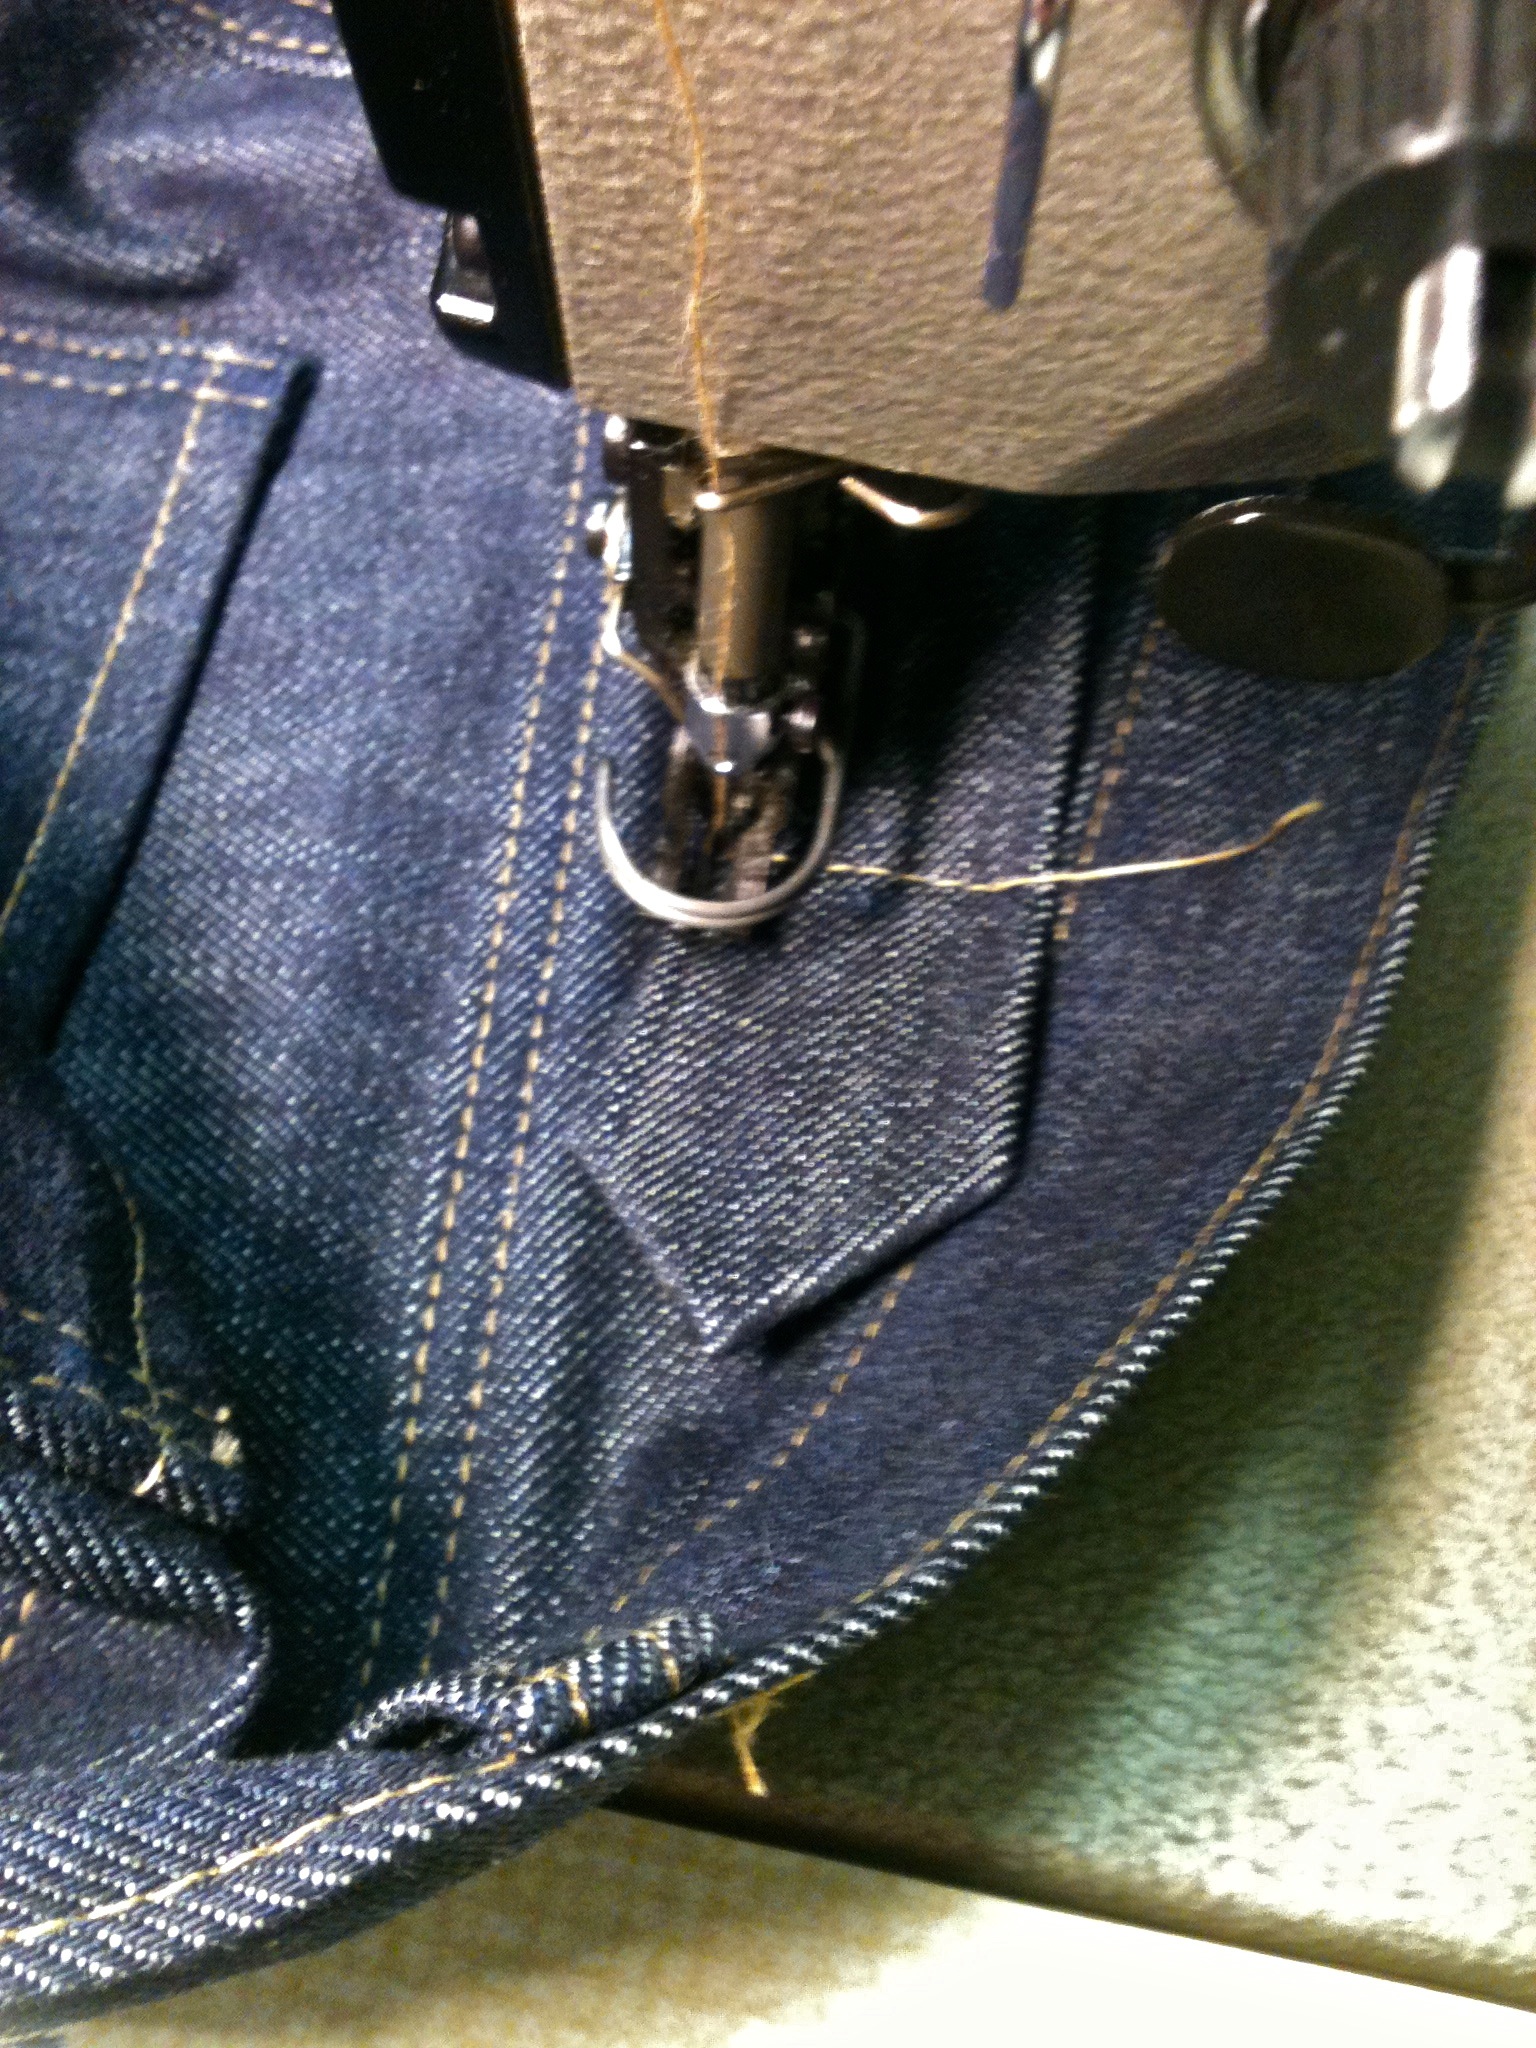 Making Your Own Jeans: The Sewing Part II